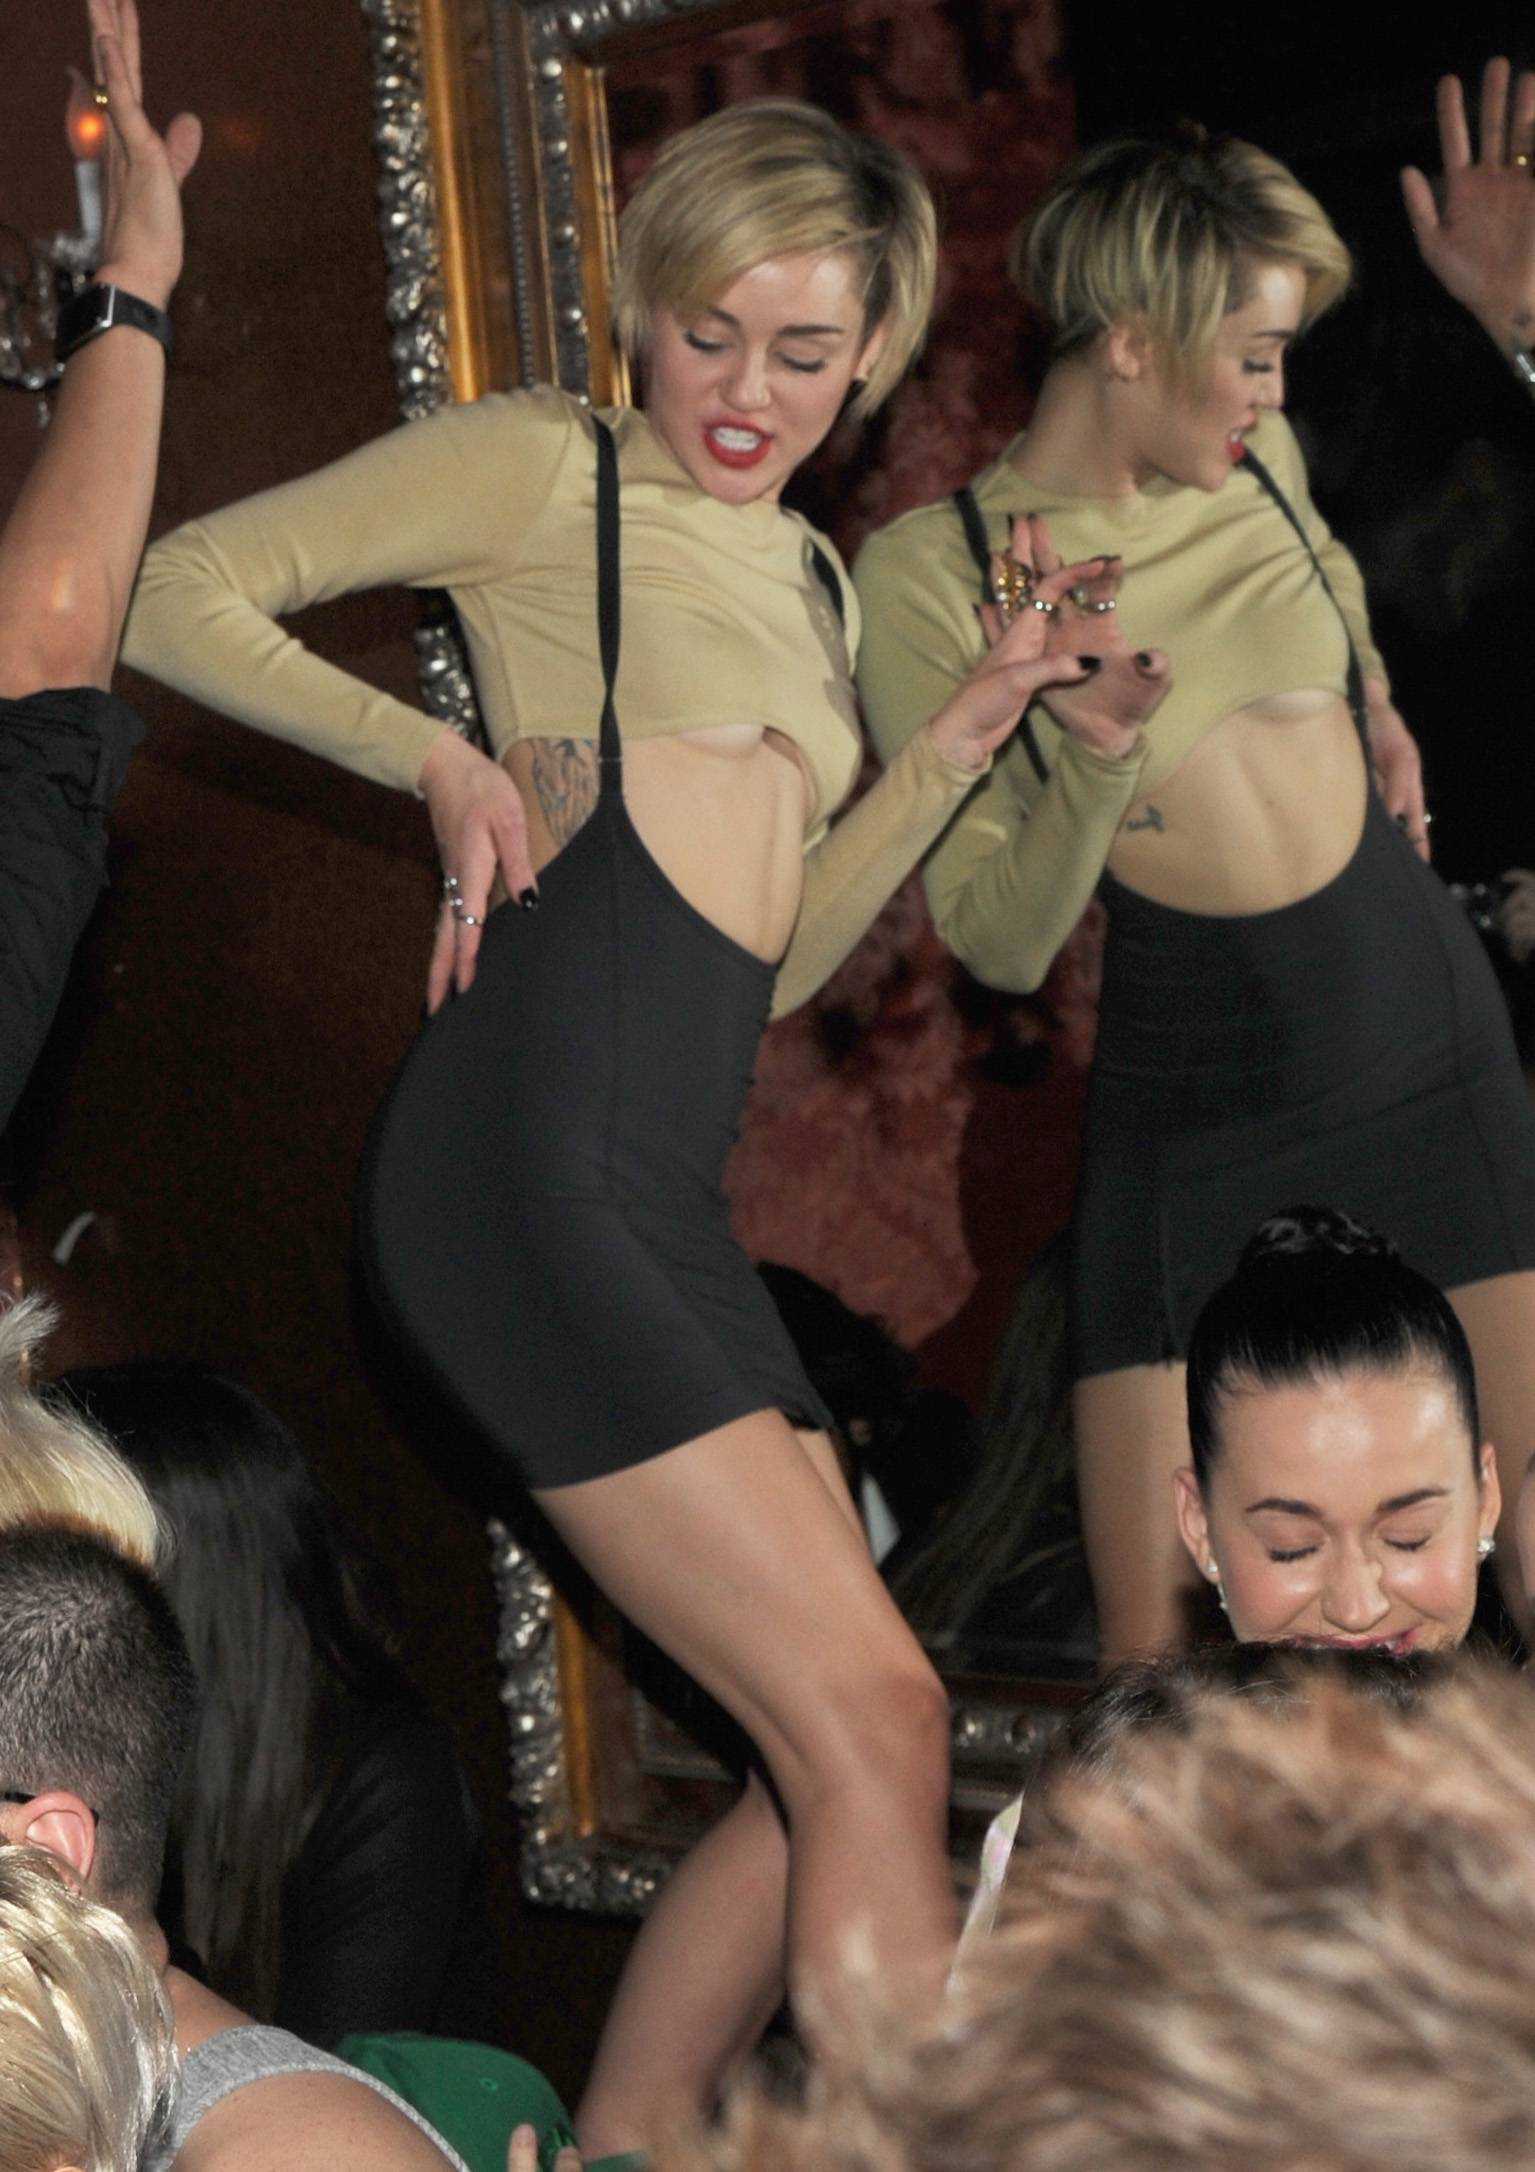 Miley Cyrus Unveils Beacher's Madhouse Las Vegas At The MGM Grand Hotel & Casino